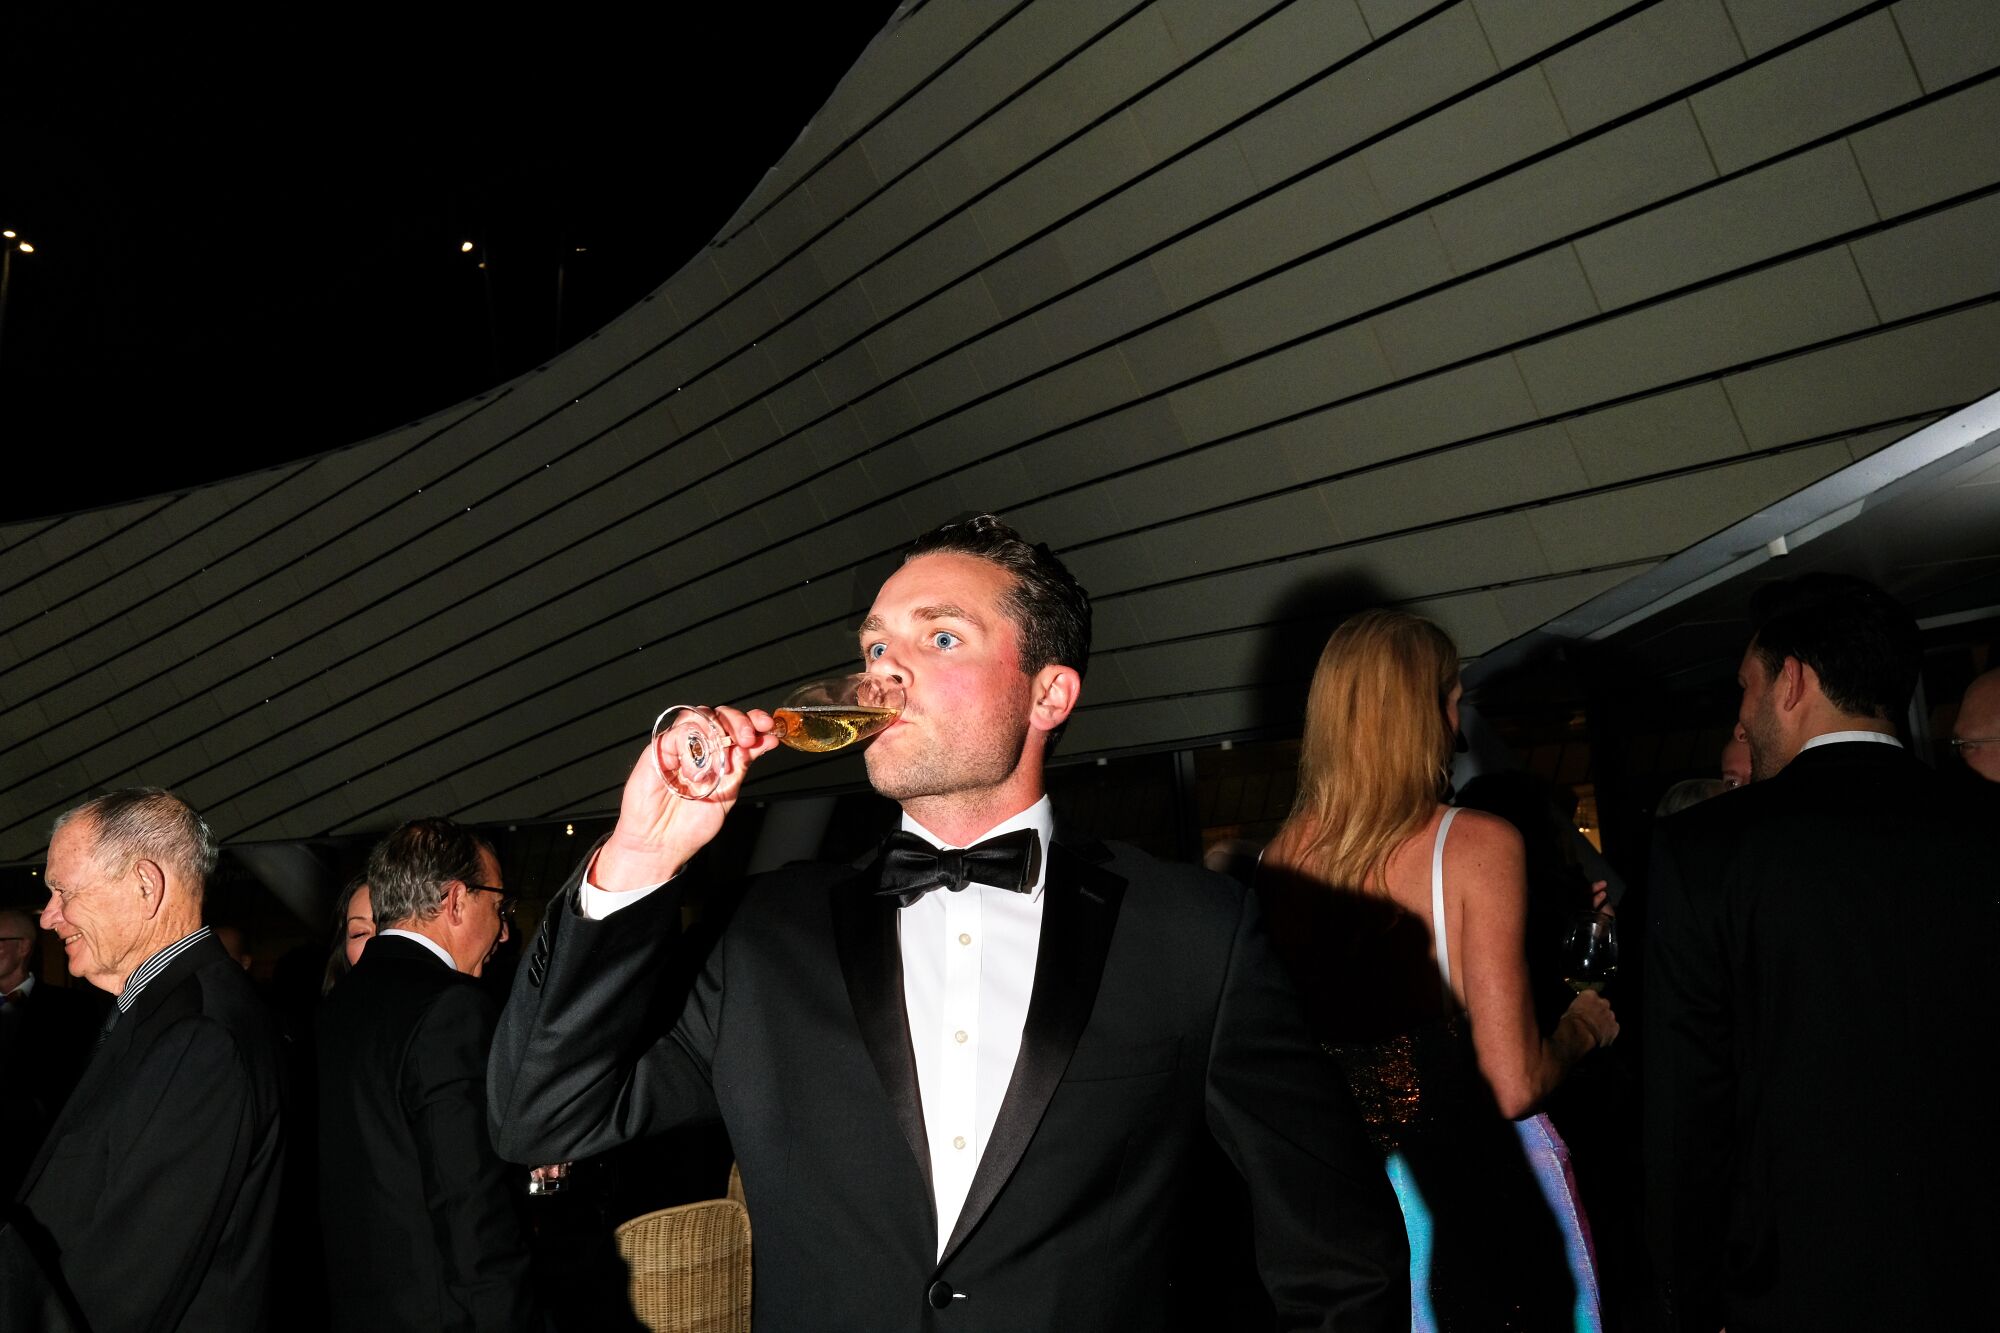 A man is drinking champagne.